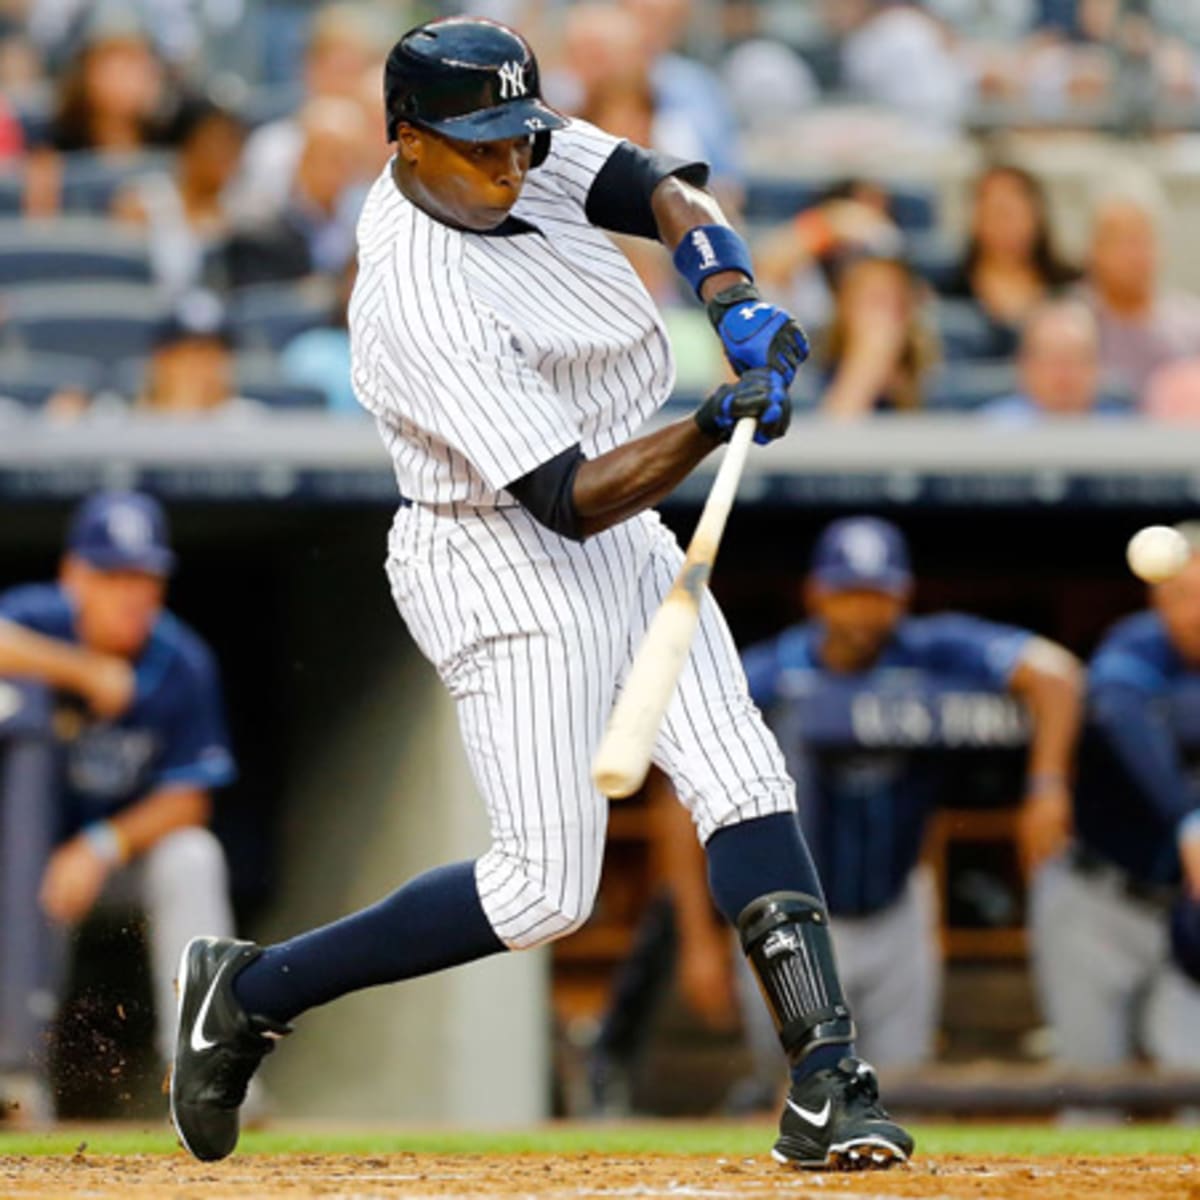 Just like old times: Derek Jeter returns, Alfonso Soriano helps